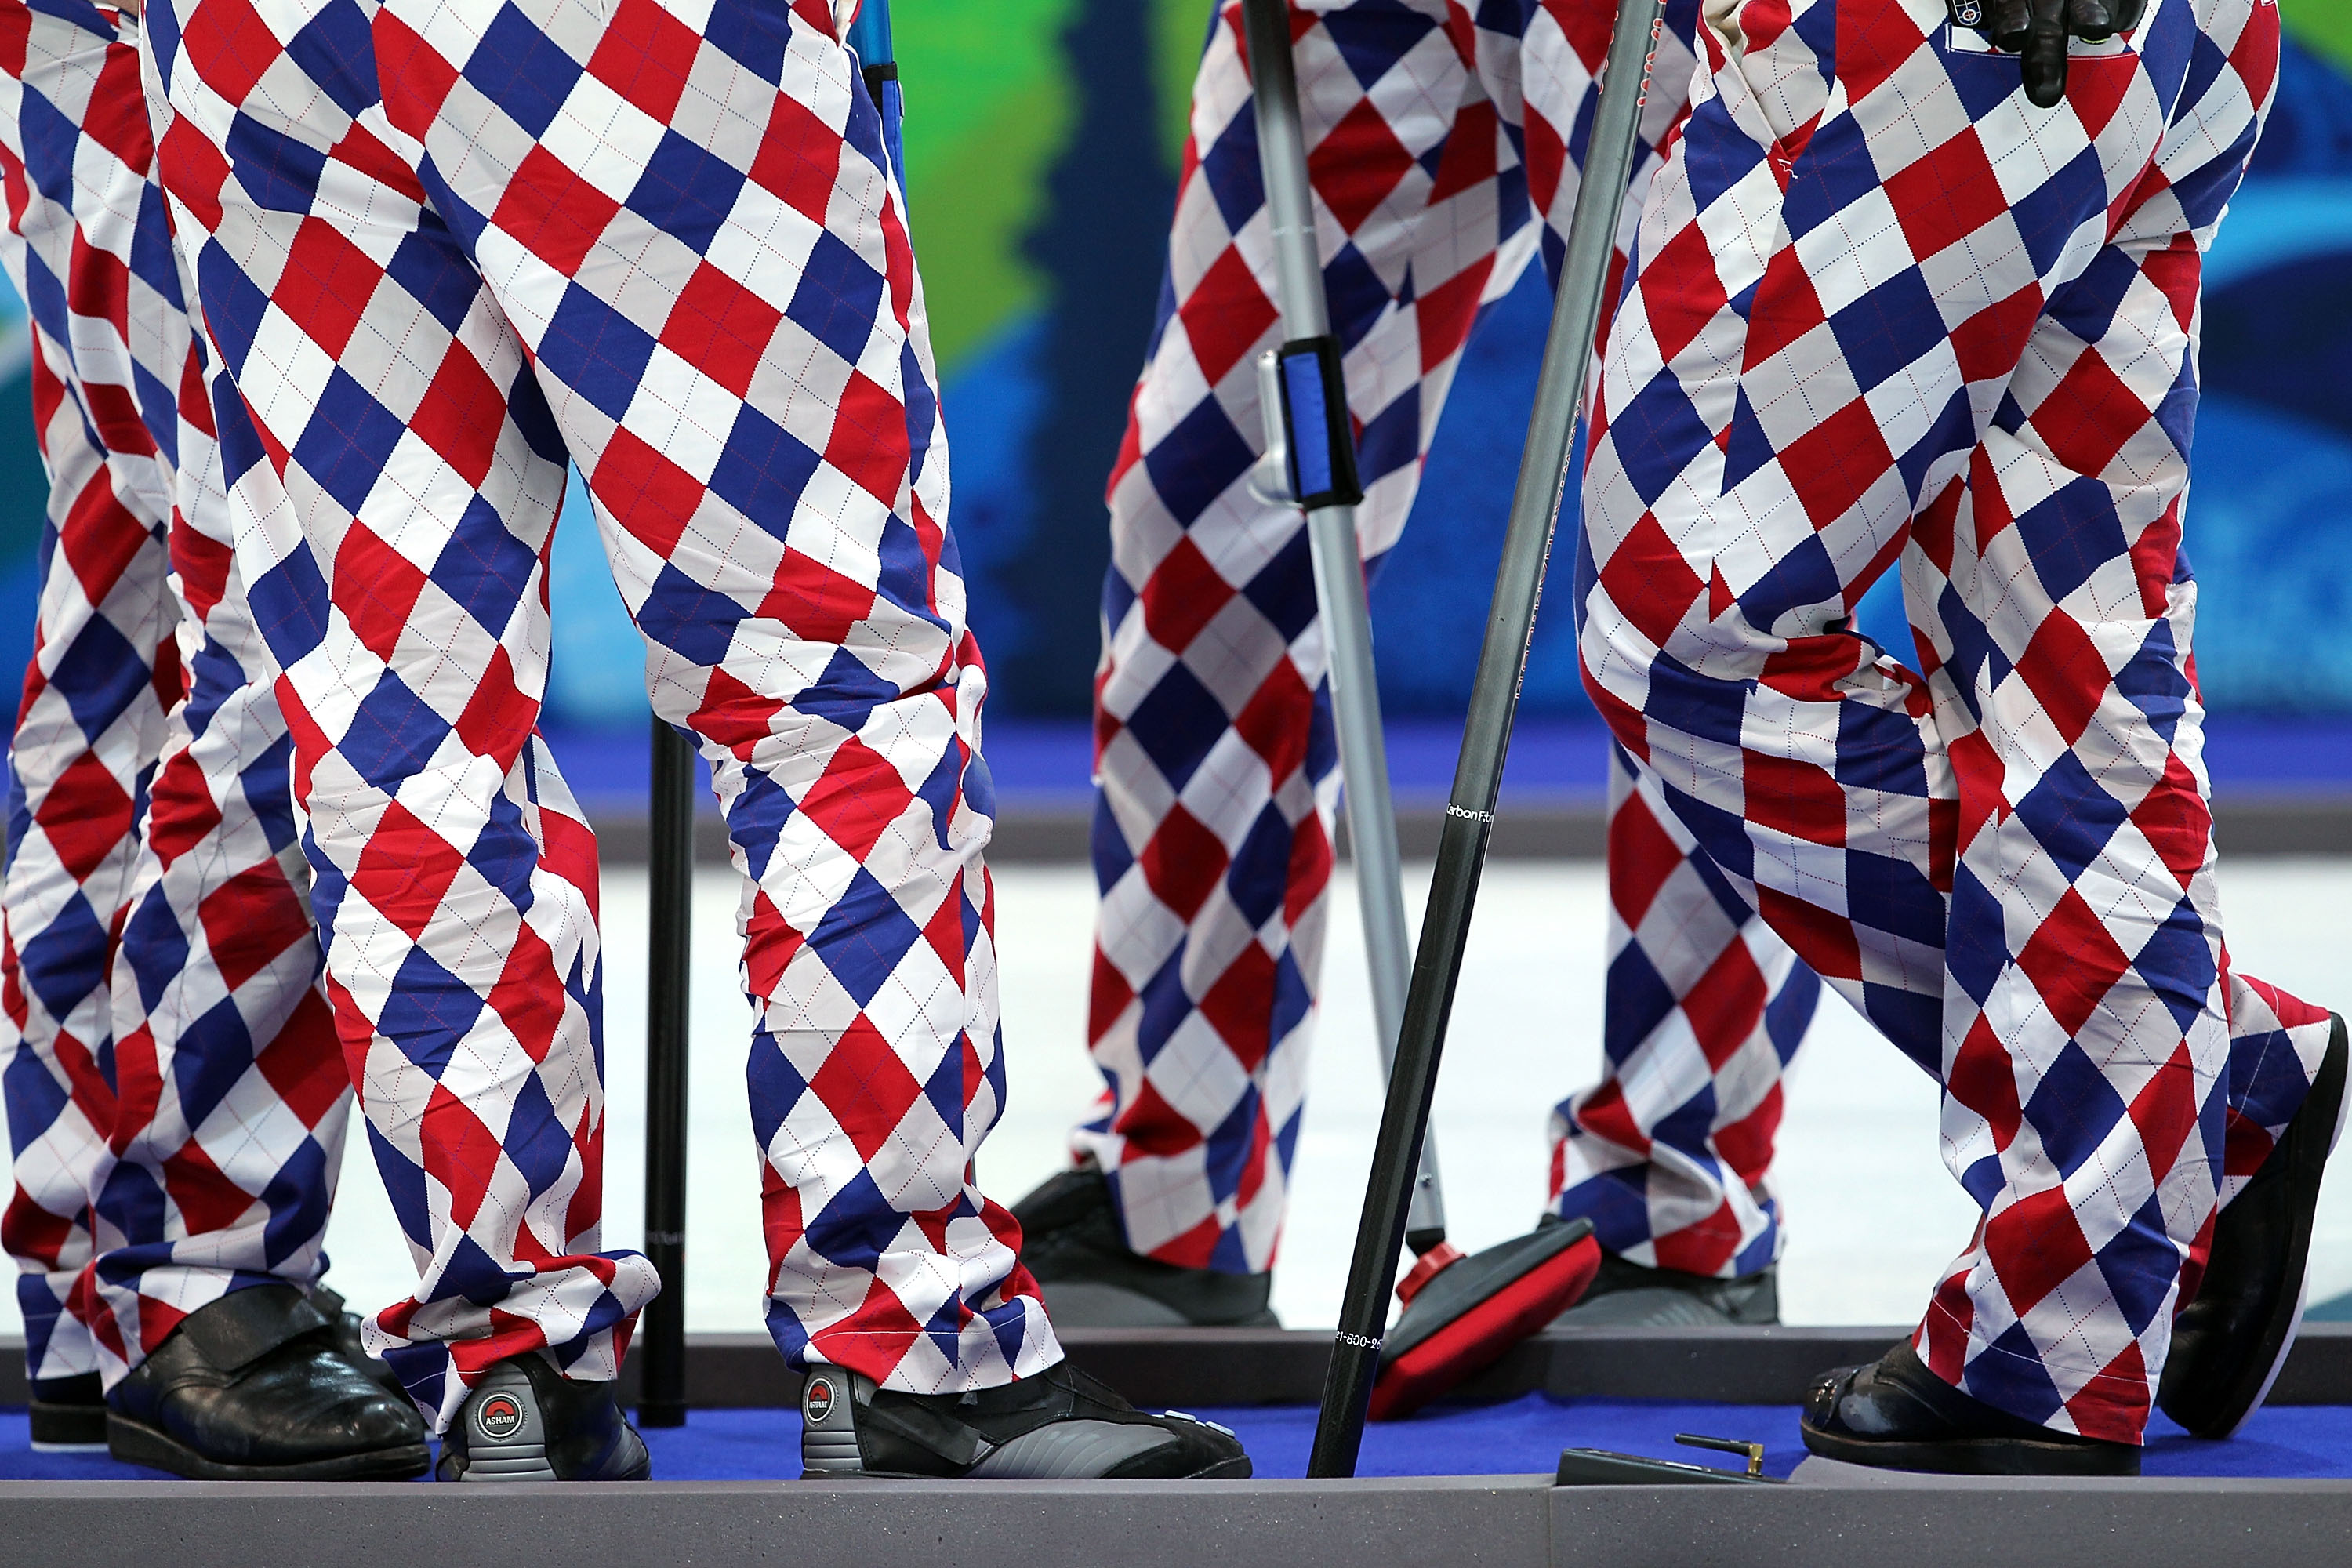 VANCOUVER, BC - FEBRUARY 20:  A detail of the pants of members of the team from Norway during the curling round robin game against Denmark on day 9 of the Vancouver 2010 Winter Olympics at Vancouver Olympic Centre on February 20, 2010 in Vancouver, Canada